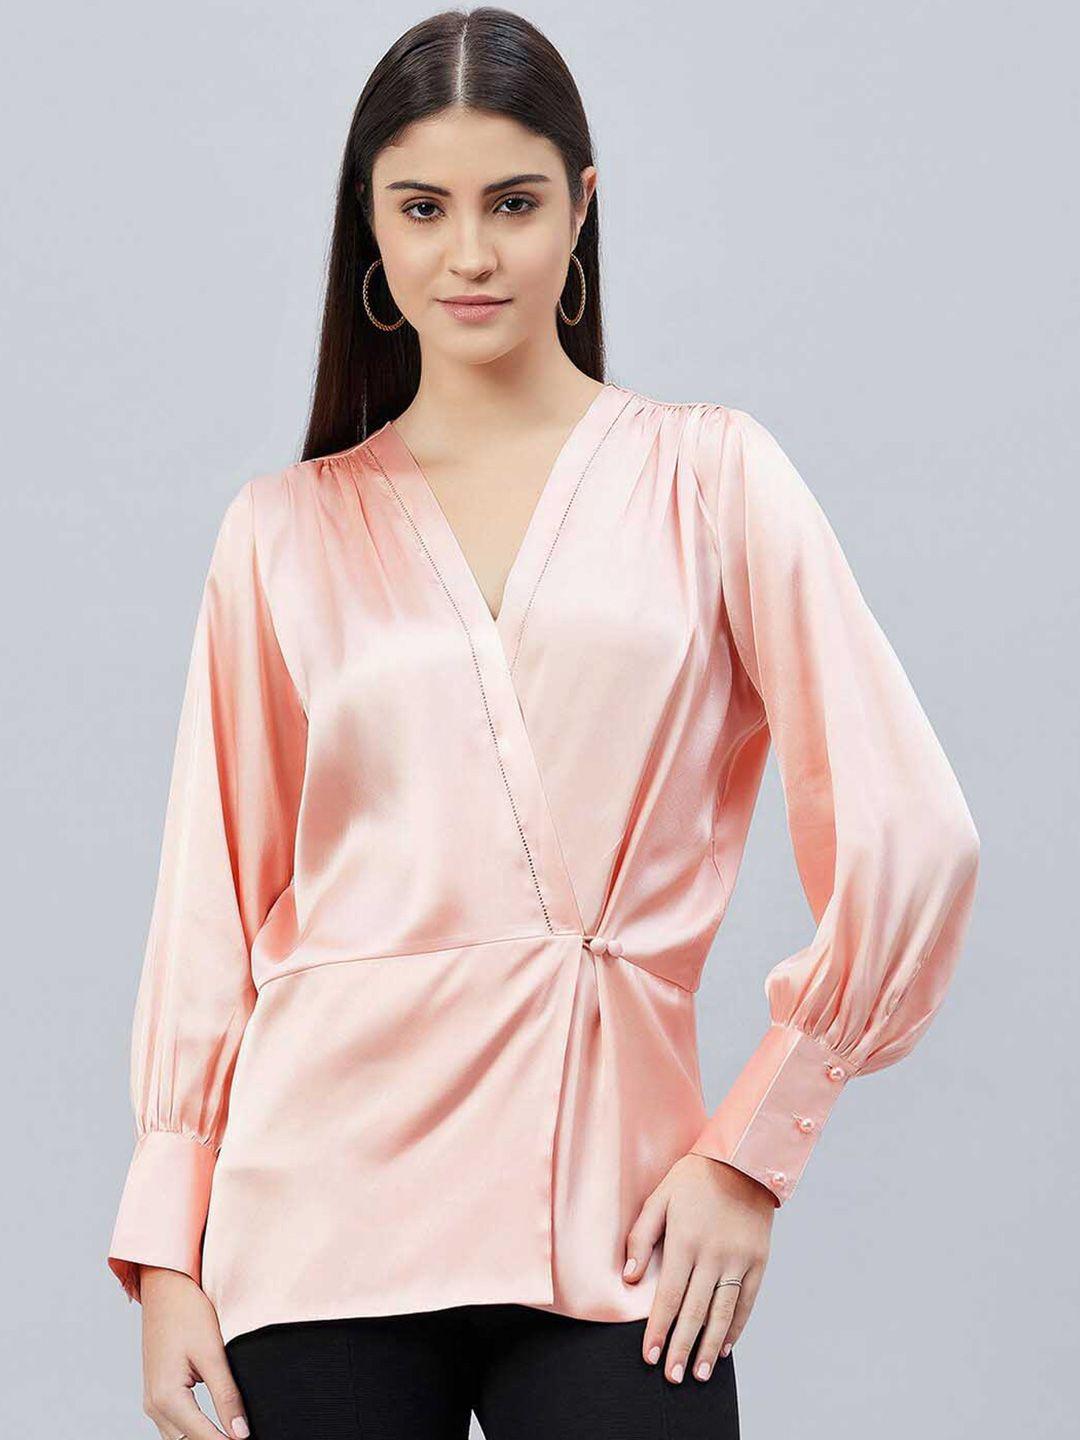 first resort by ramola bachchan classic v-neck gathered satin shirt style top